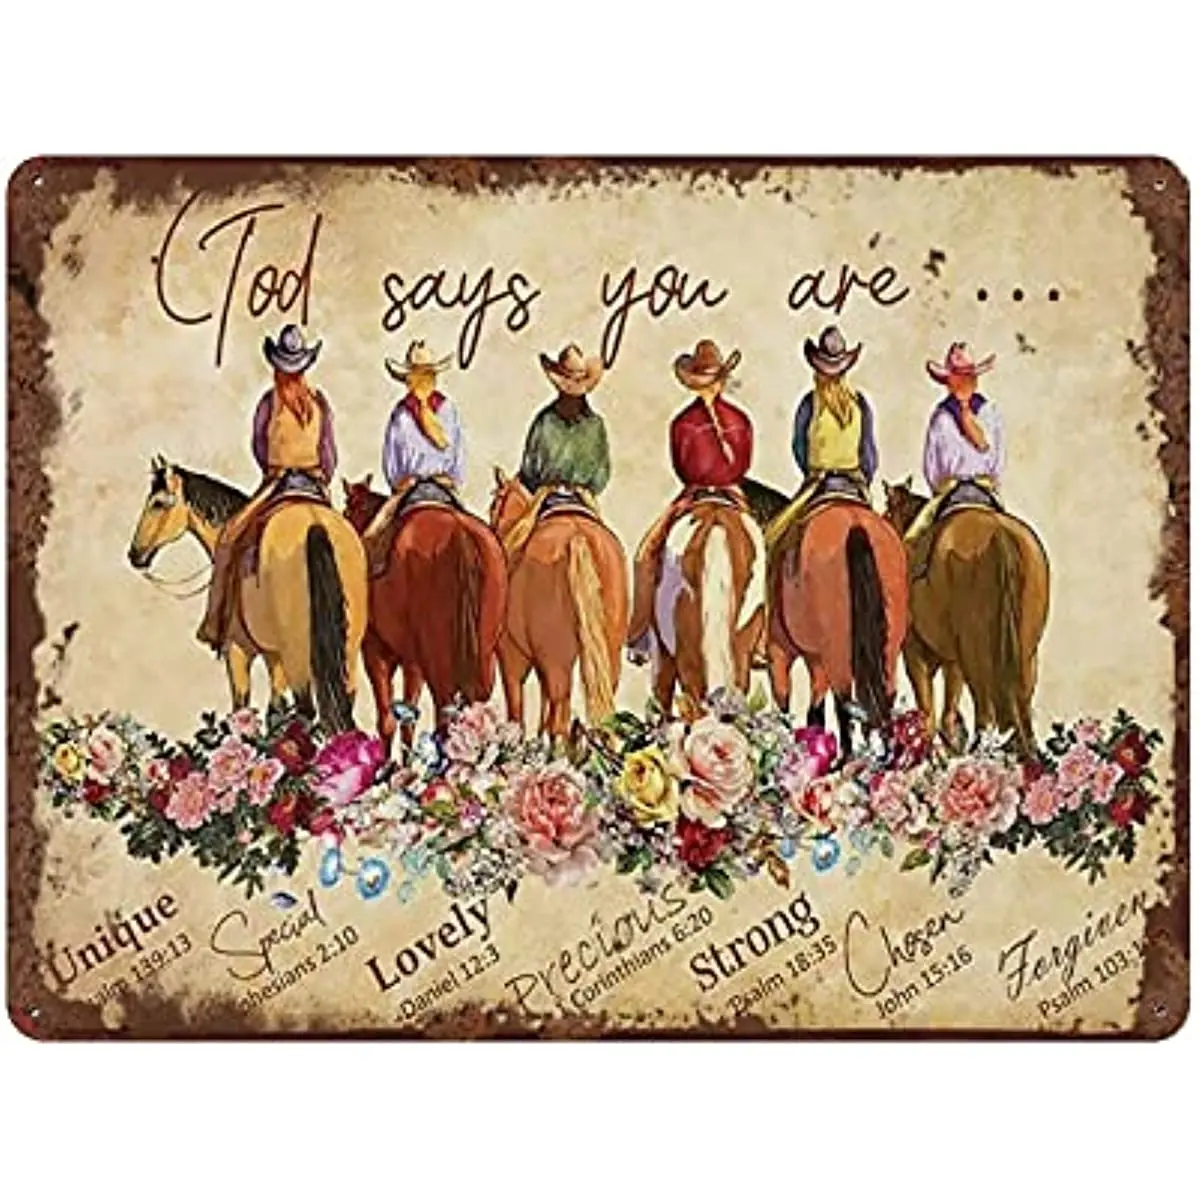 

God Says You are Cowgirl Bible Verse Inspirational Vintage Tin Sign for Horse Lovers Cowgirl Christian Art Vintage Wall Decor